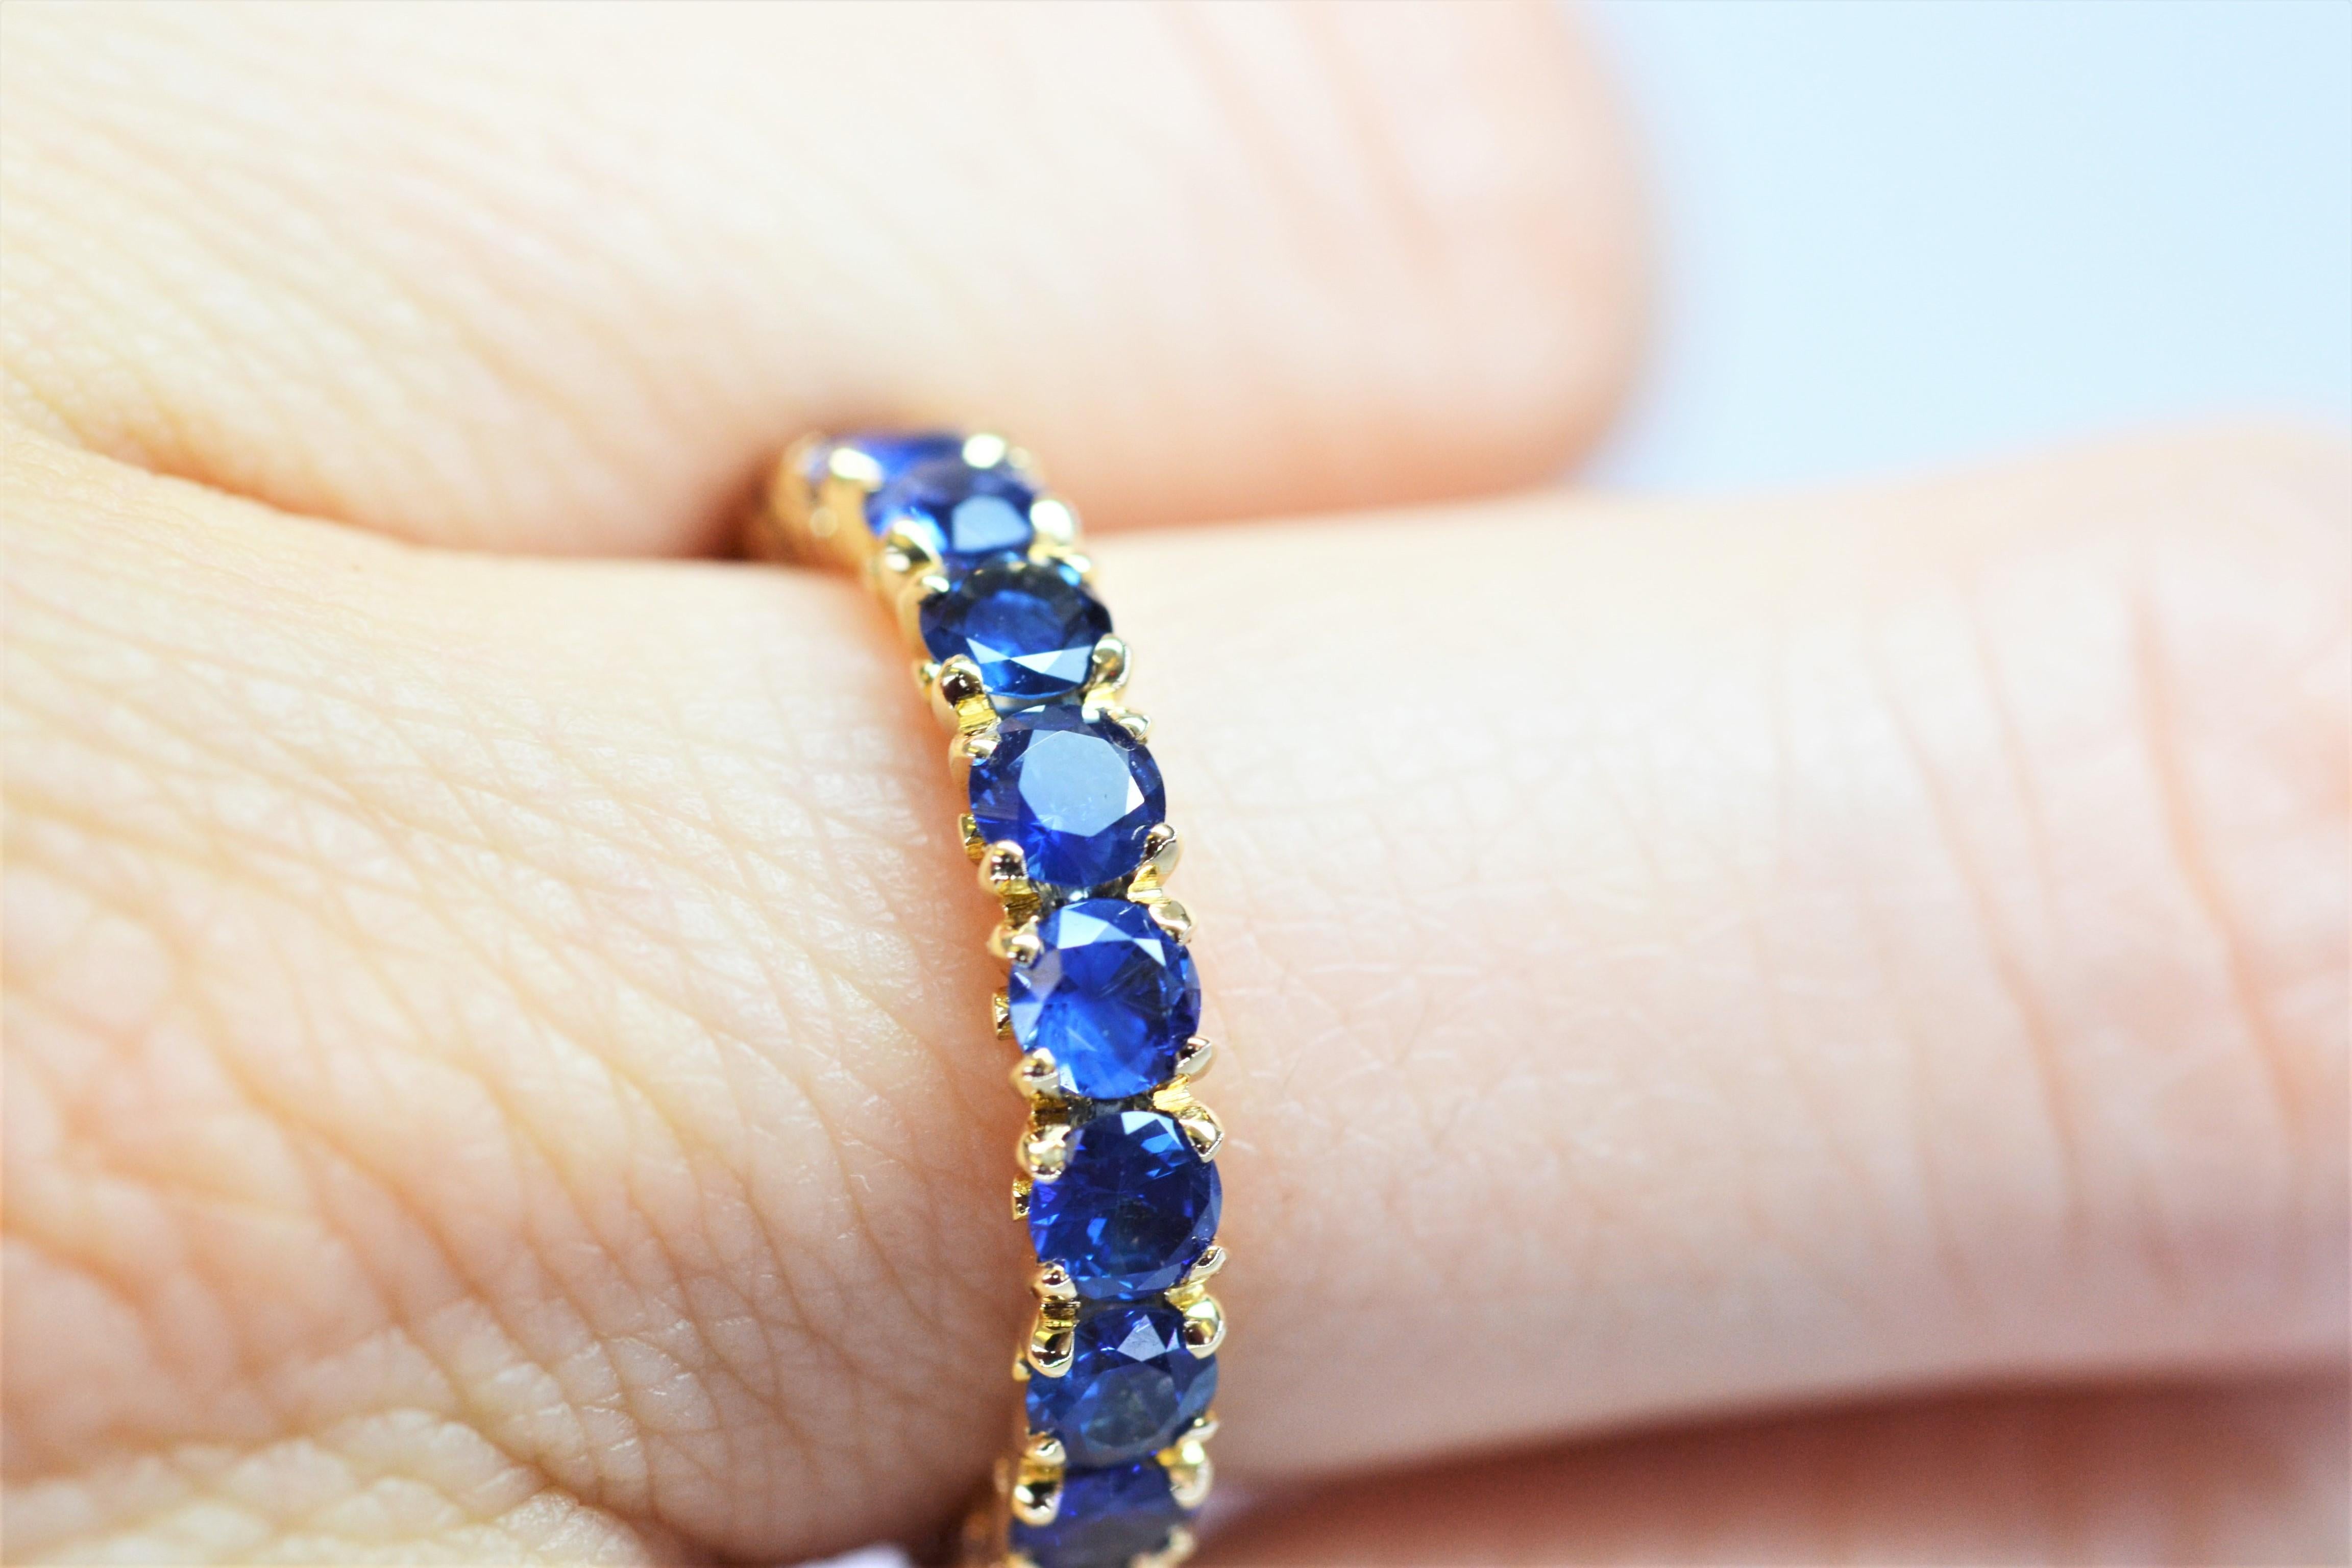 This elegant blossom eternity ring combines beauty and style. It can be worn both casually, or more formally and can be worn on its own, or layered with other rings. The royal blue sapphires are set in 18k yellow gold, in the blossom collection’s